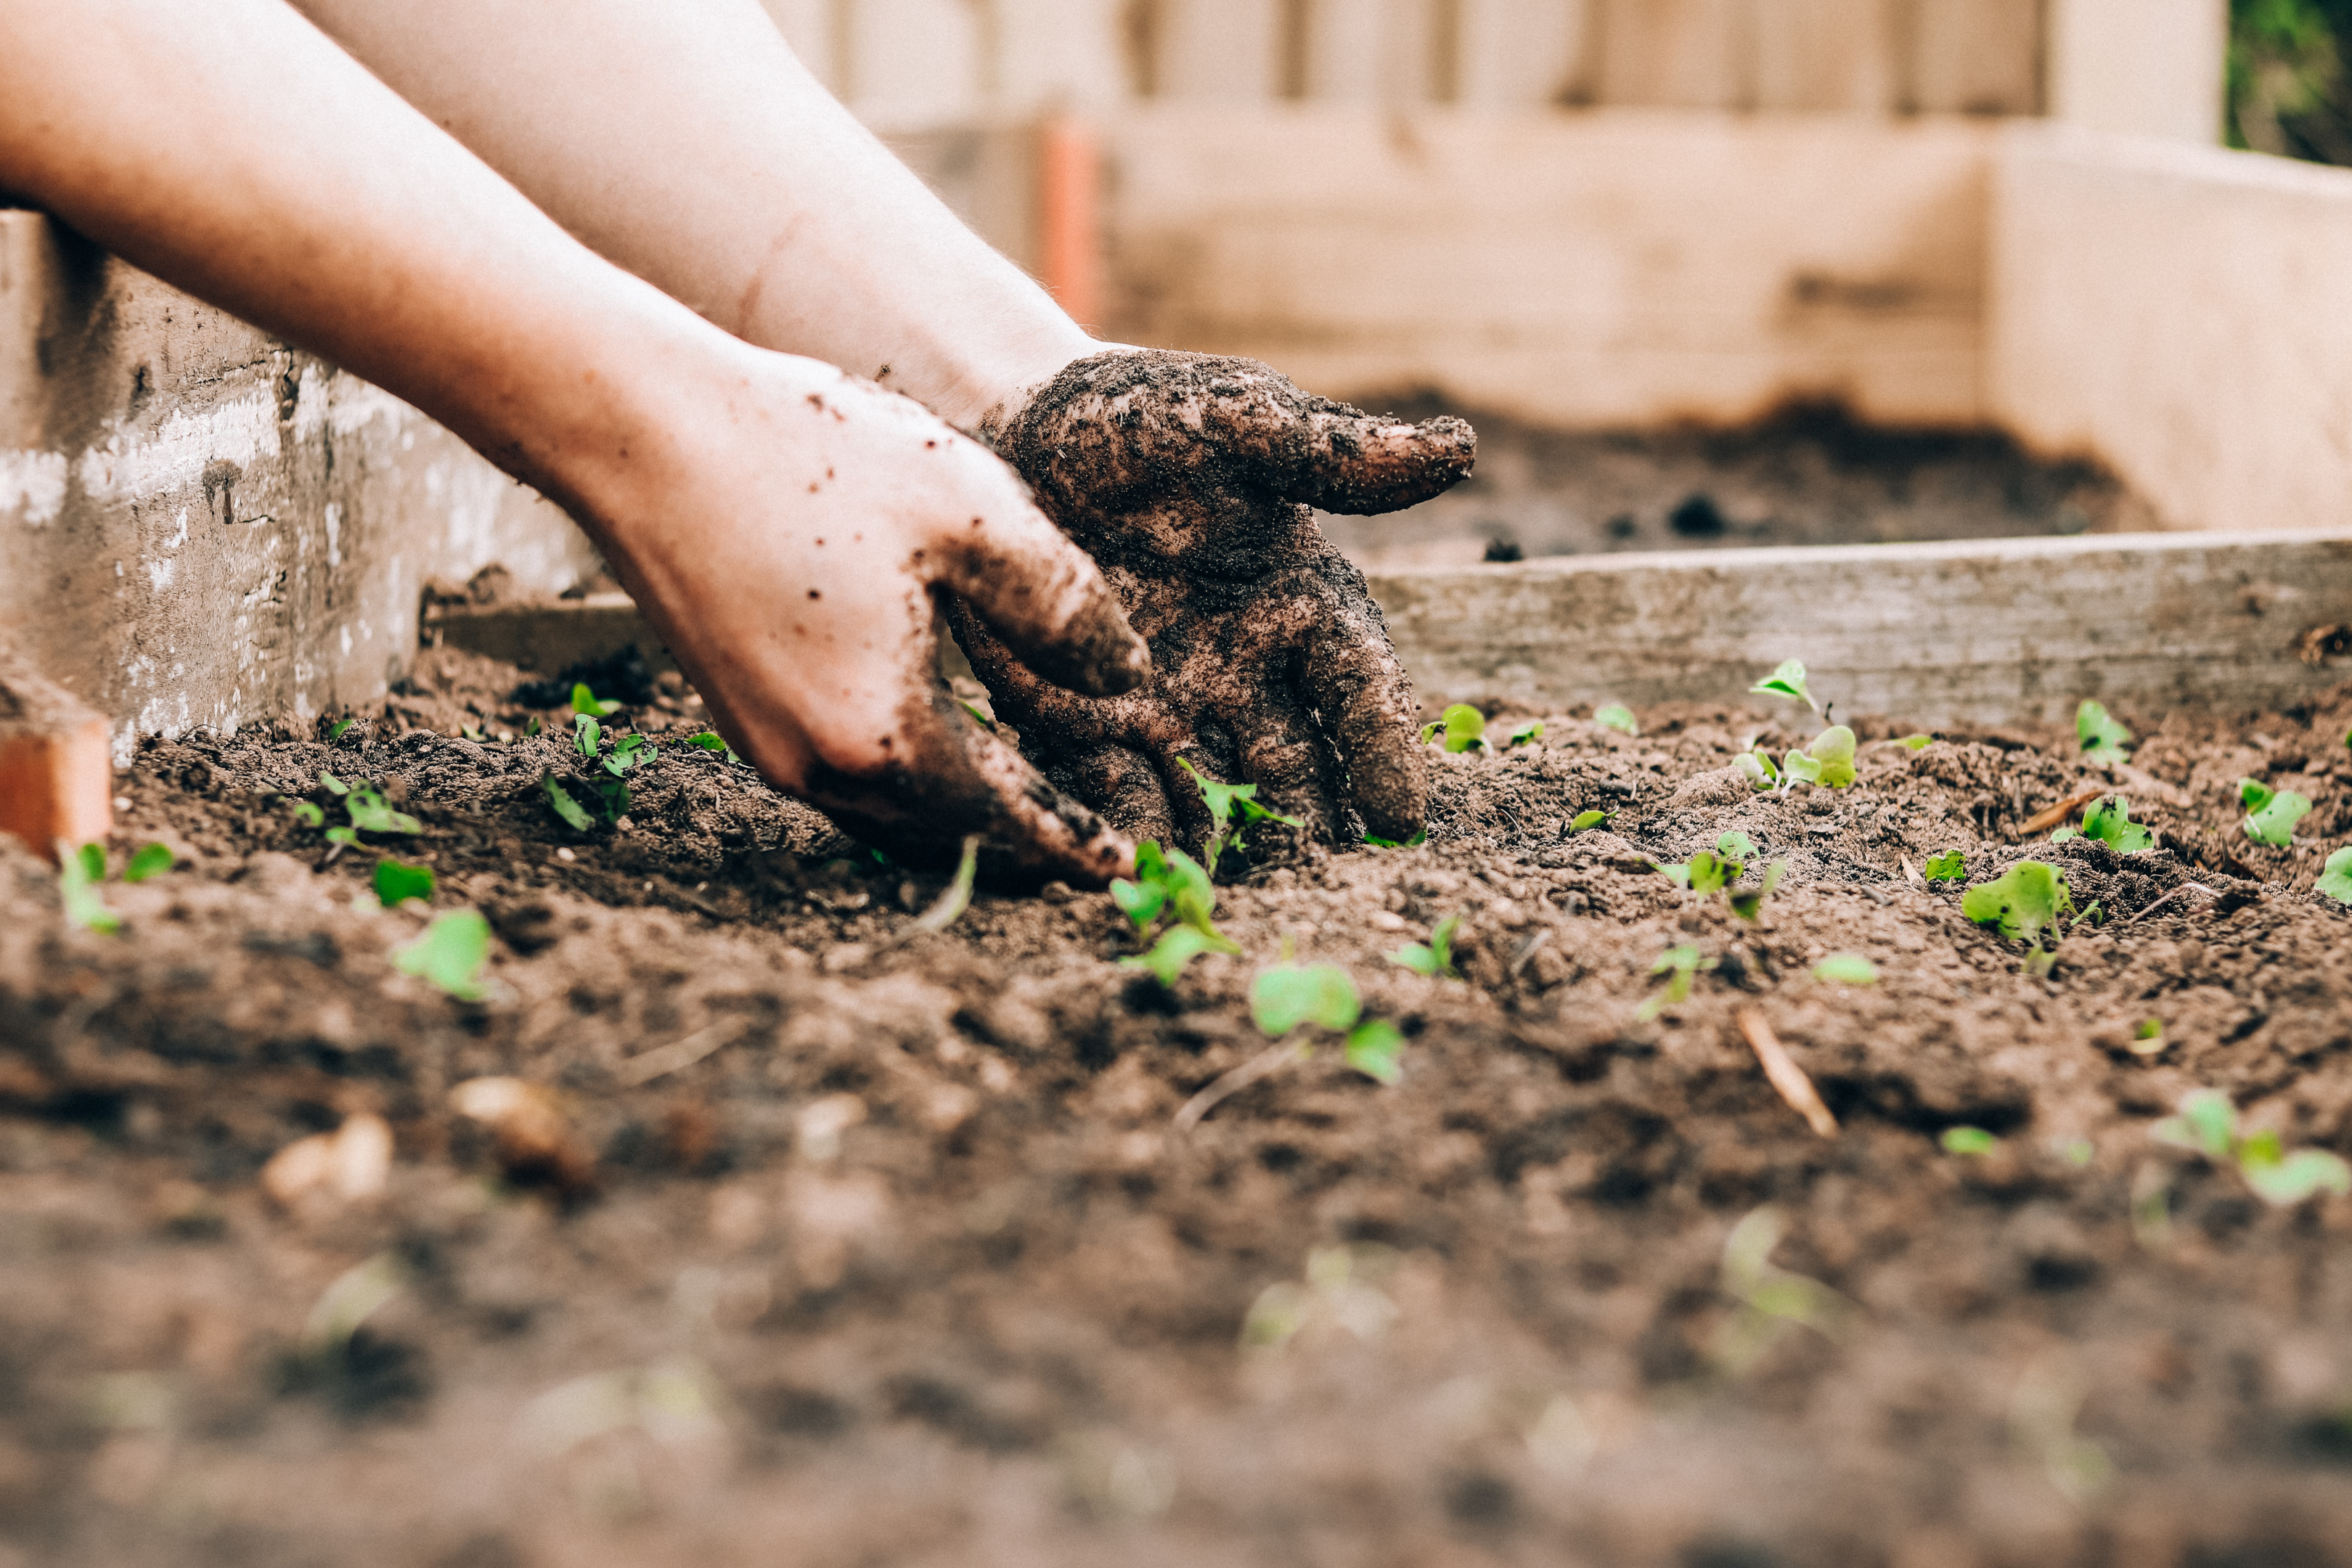 The dirtier the hands the more fulfilling planting is | Photo from Unsplash 